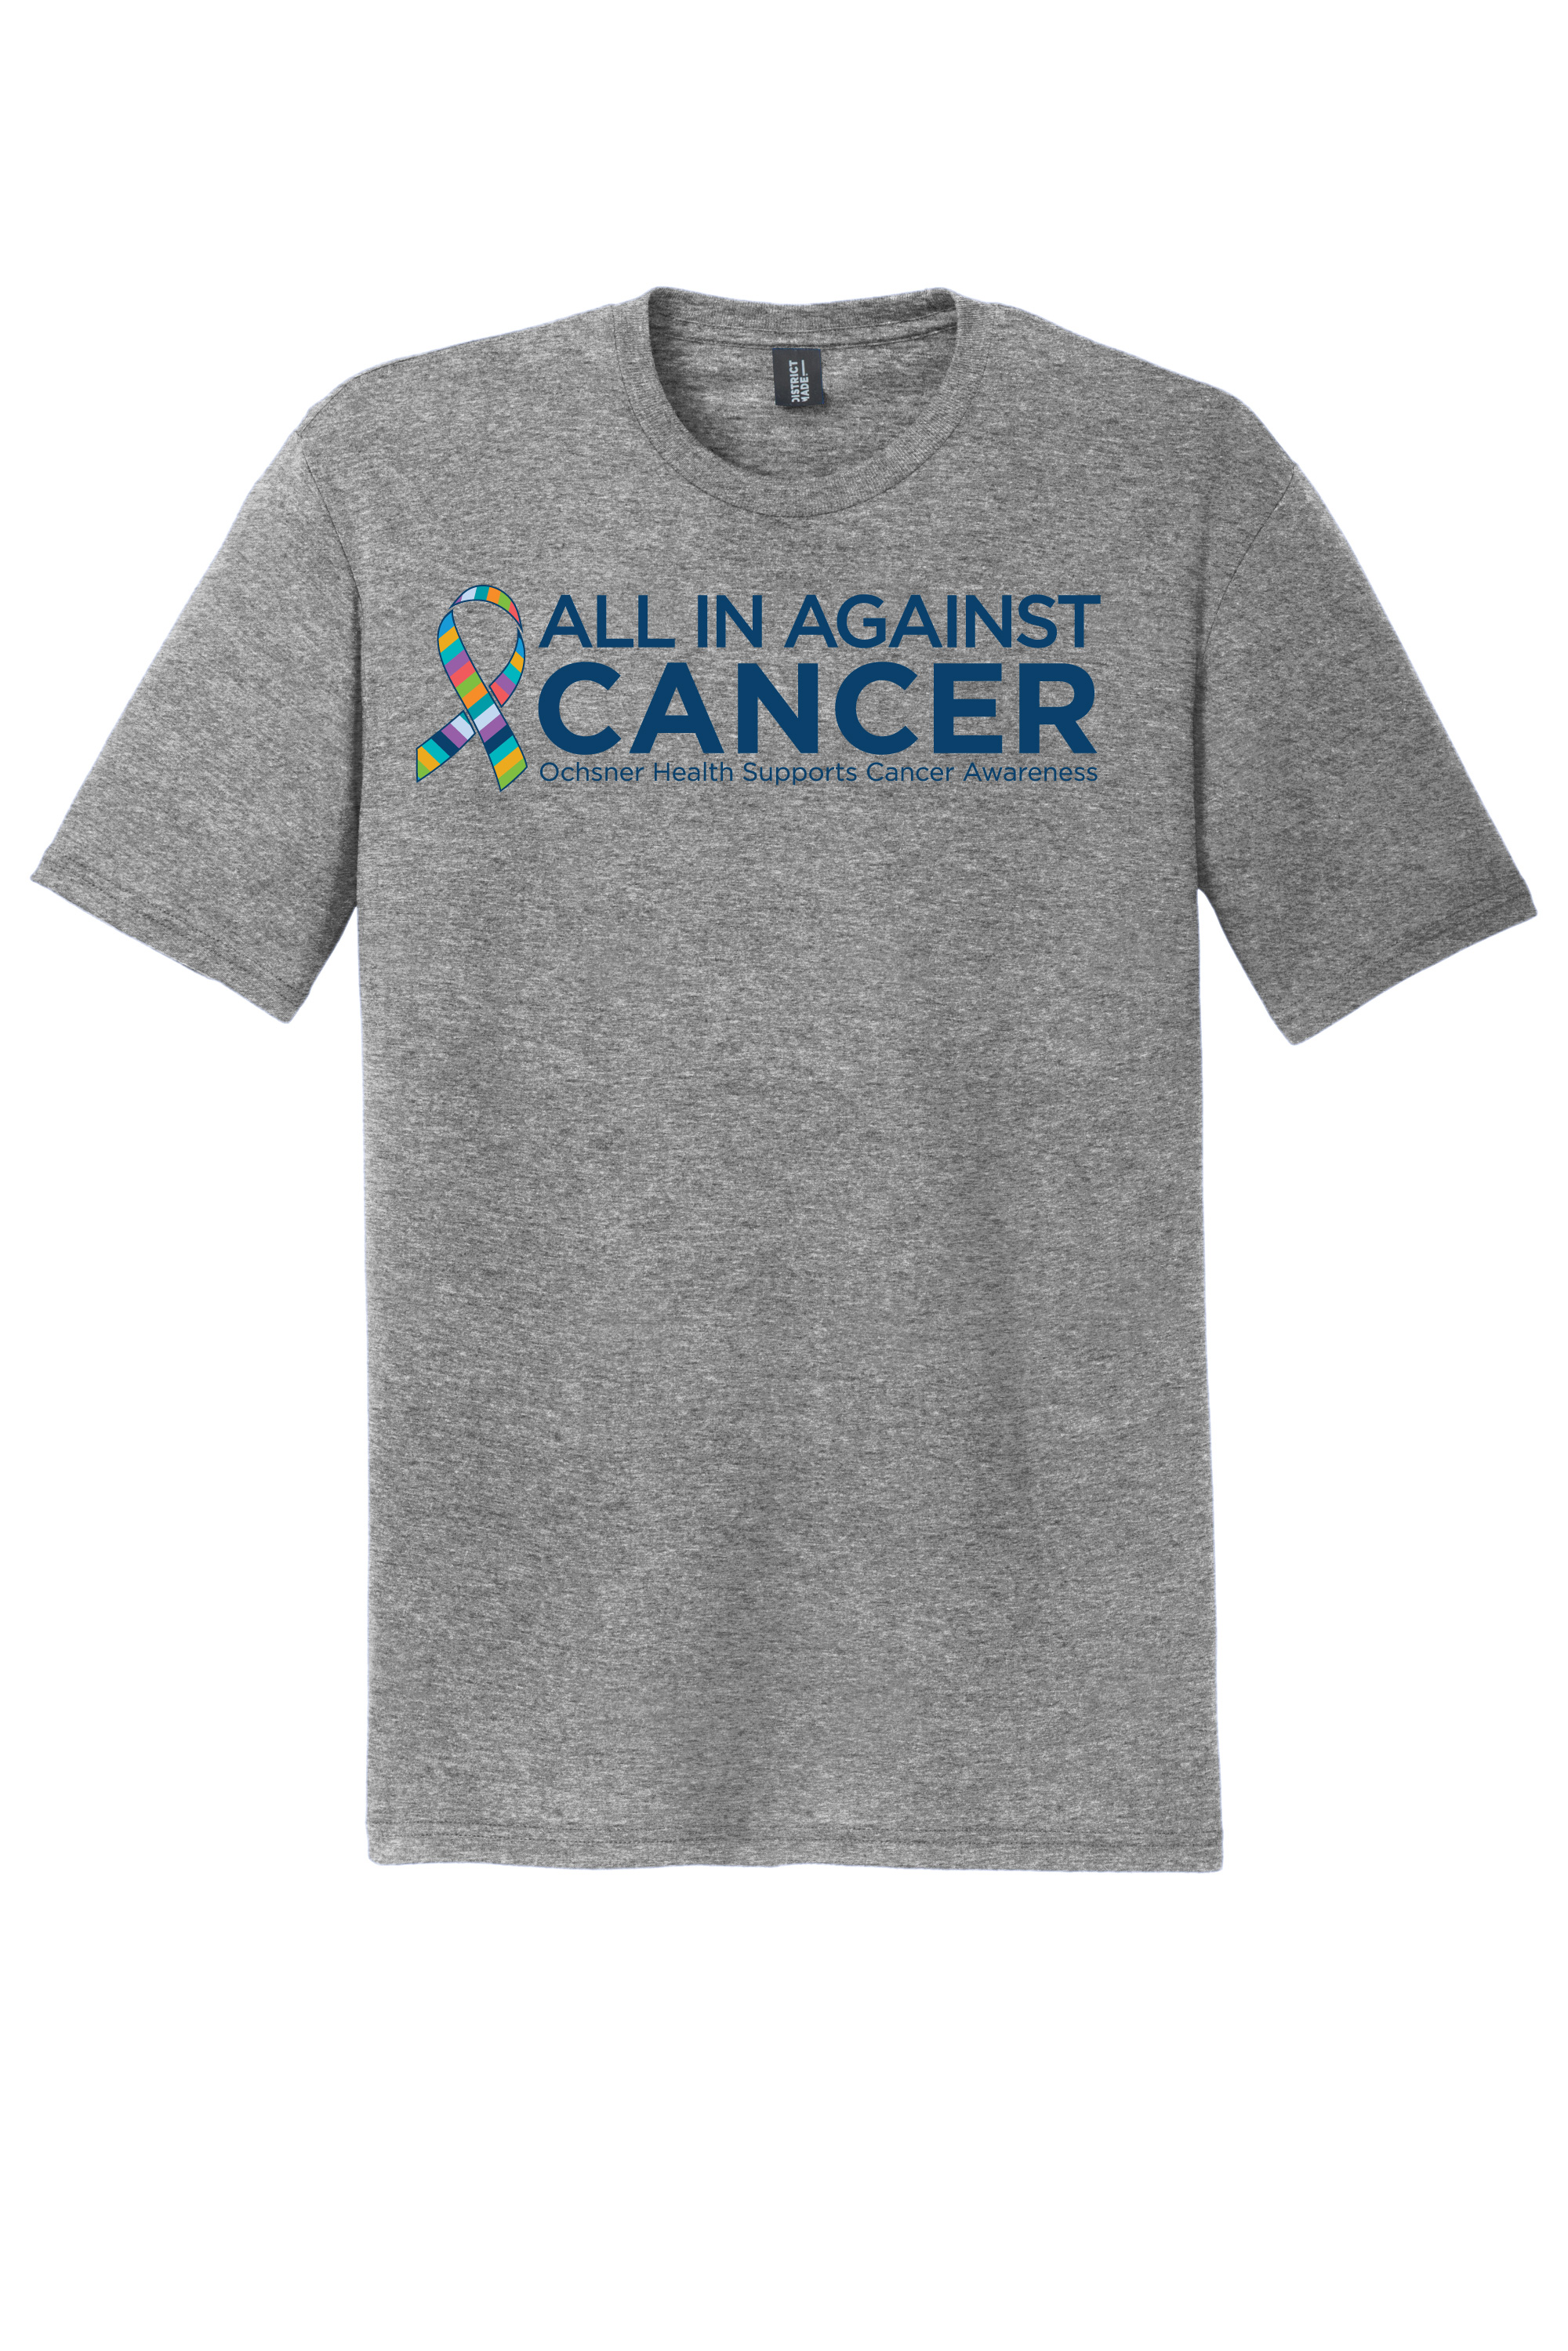 All in Against Cancer Unisex T-Shirt, Gray, large image number 1